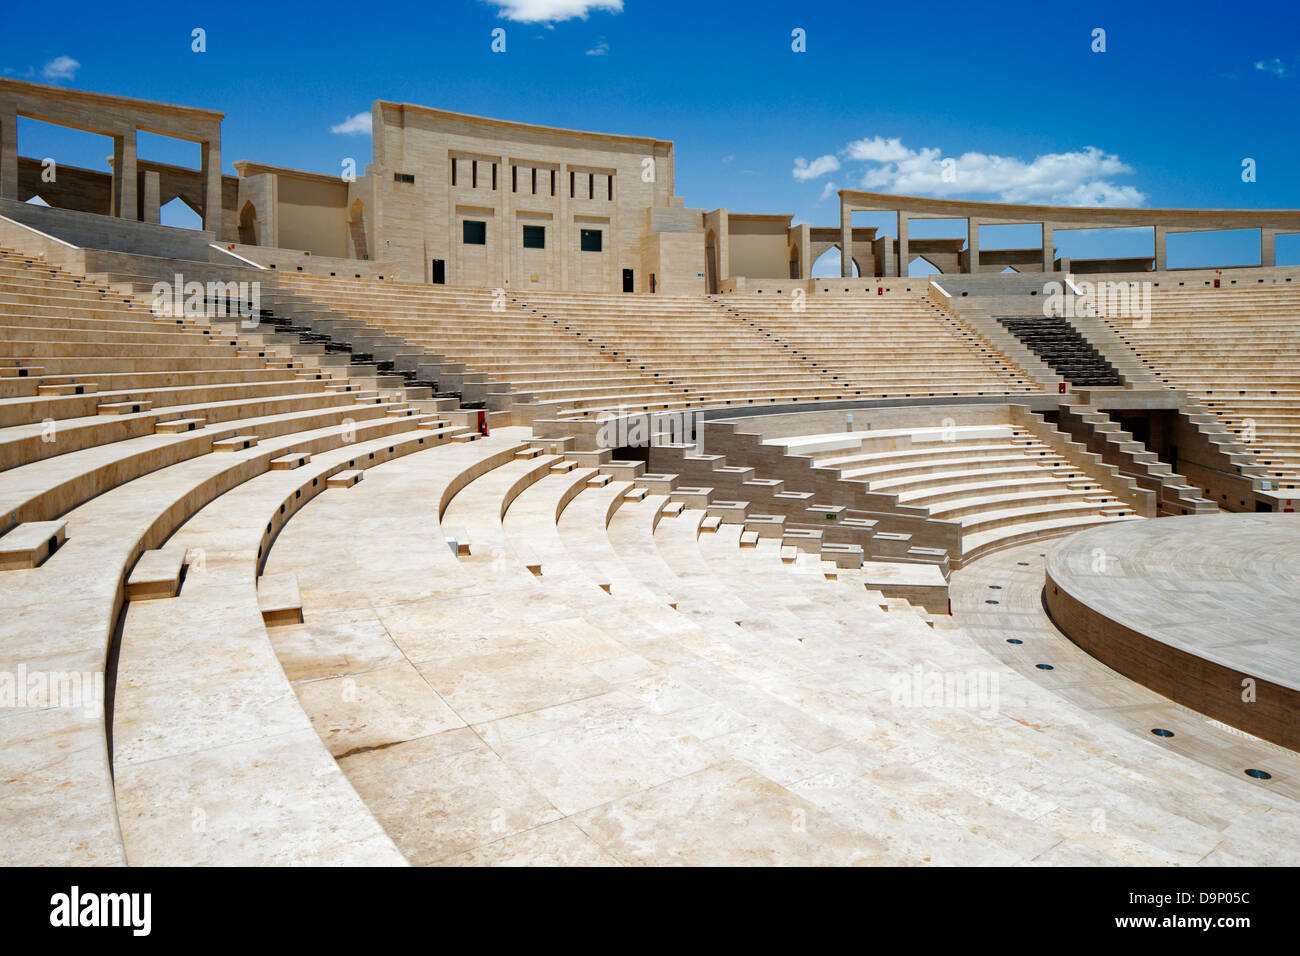 The Katara Amphitheater, Doha is a crafted balance between the classical Greek theater concept and the traditional Islamic featu Stock Photo